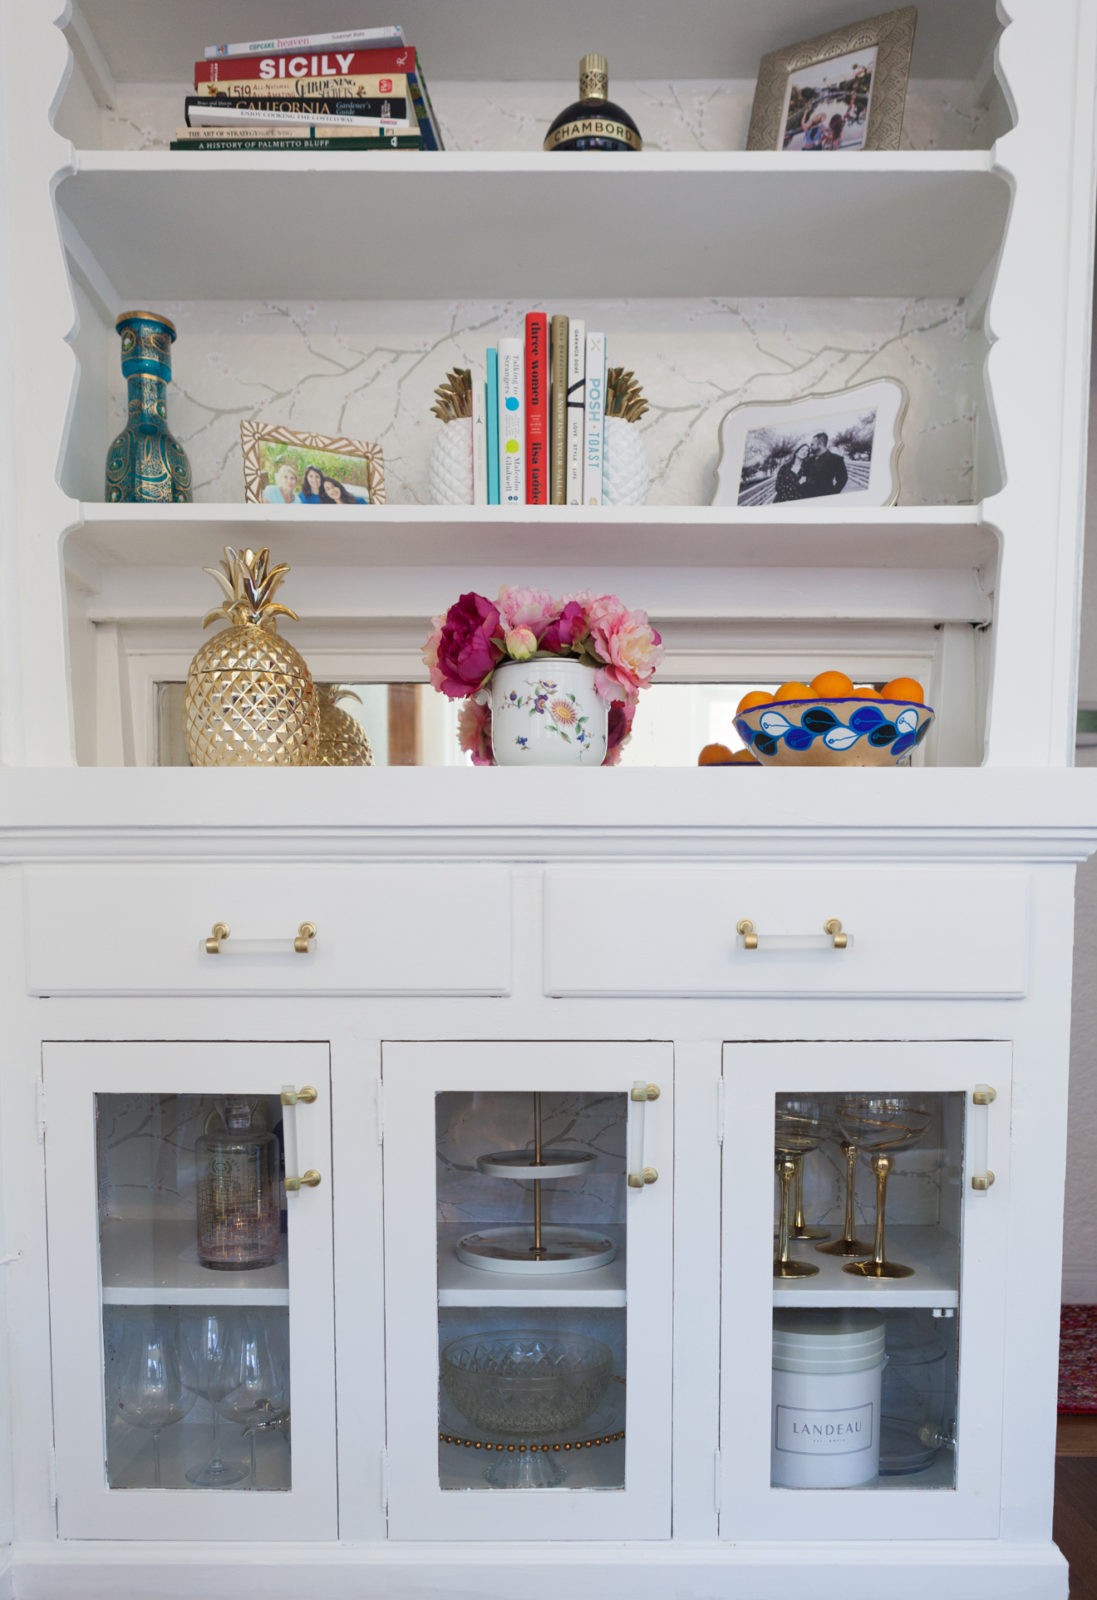 How to Decorate a BookshelfDIY Home Decor hutch remodel by Los Angeles Home Decor Blogger Laura Lily,